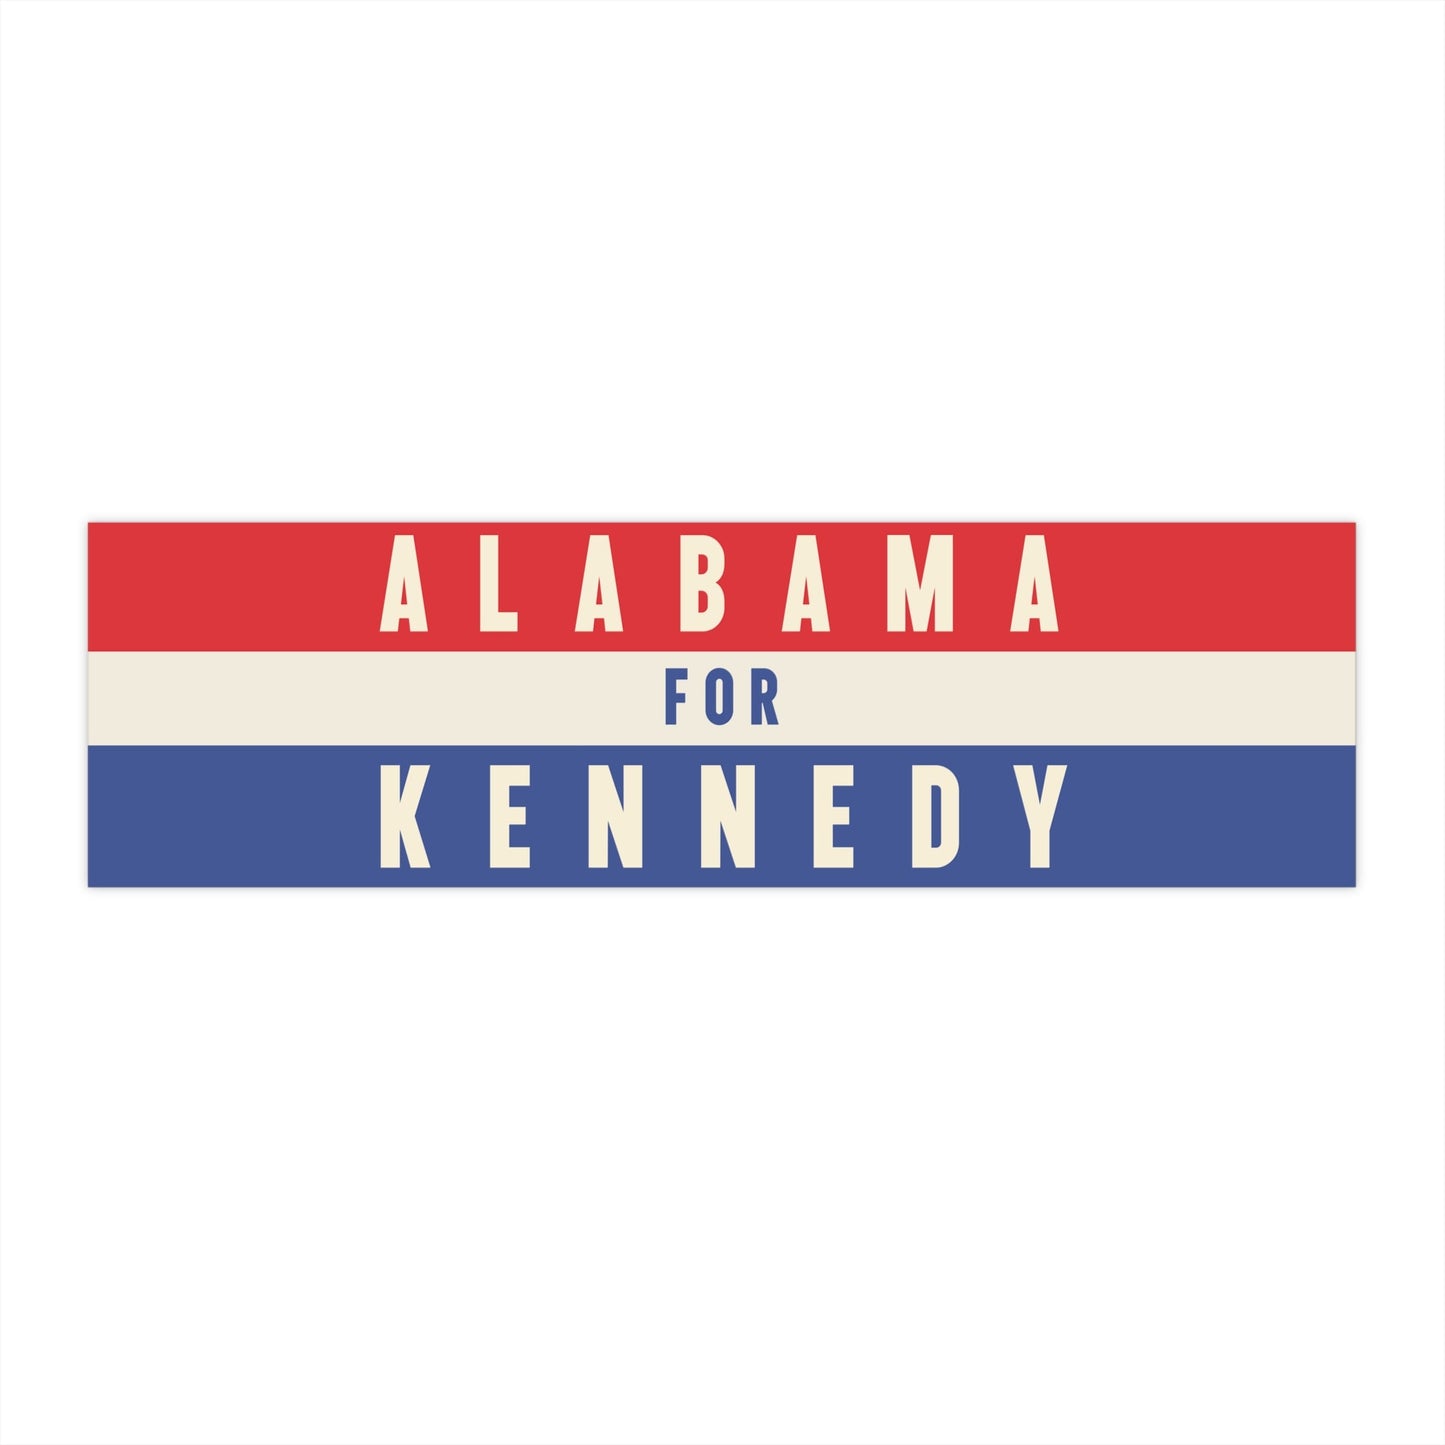 Alabama for Kennedy Bumper Sticker - TEAM KENNEDY. All rights reserved